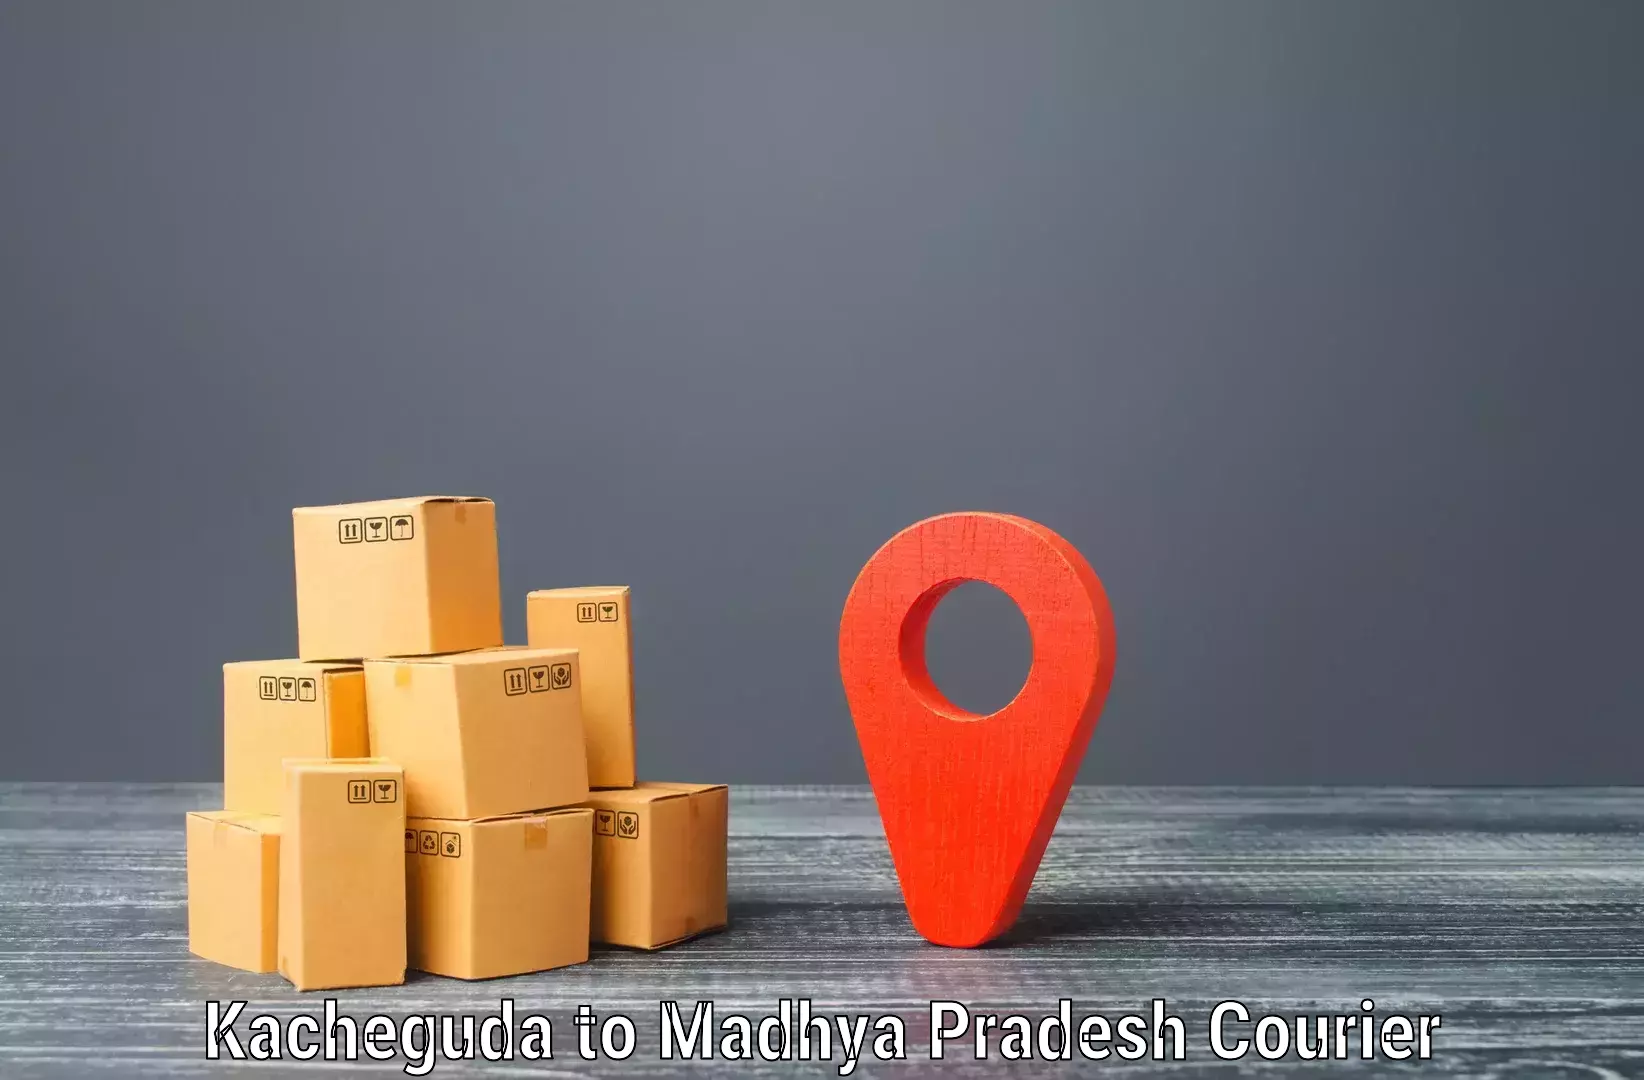 Dynamic courier operations in Kacheguda to IIIT Bhopal